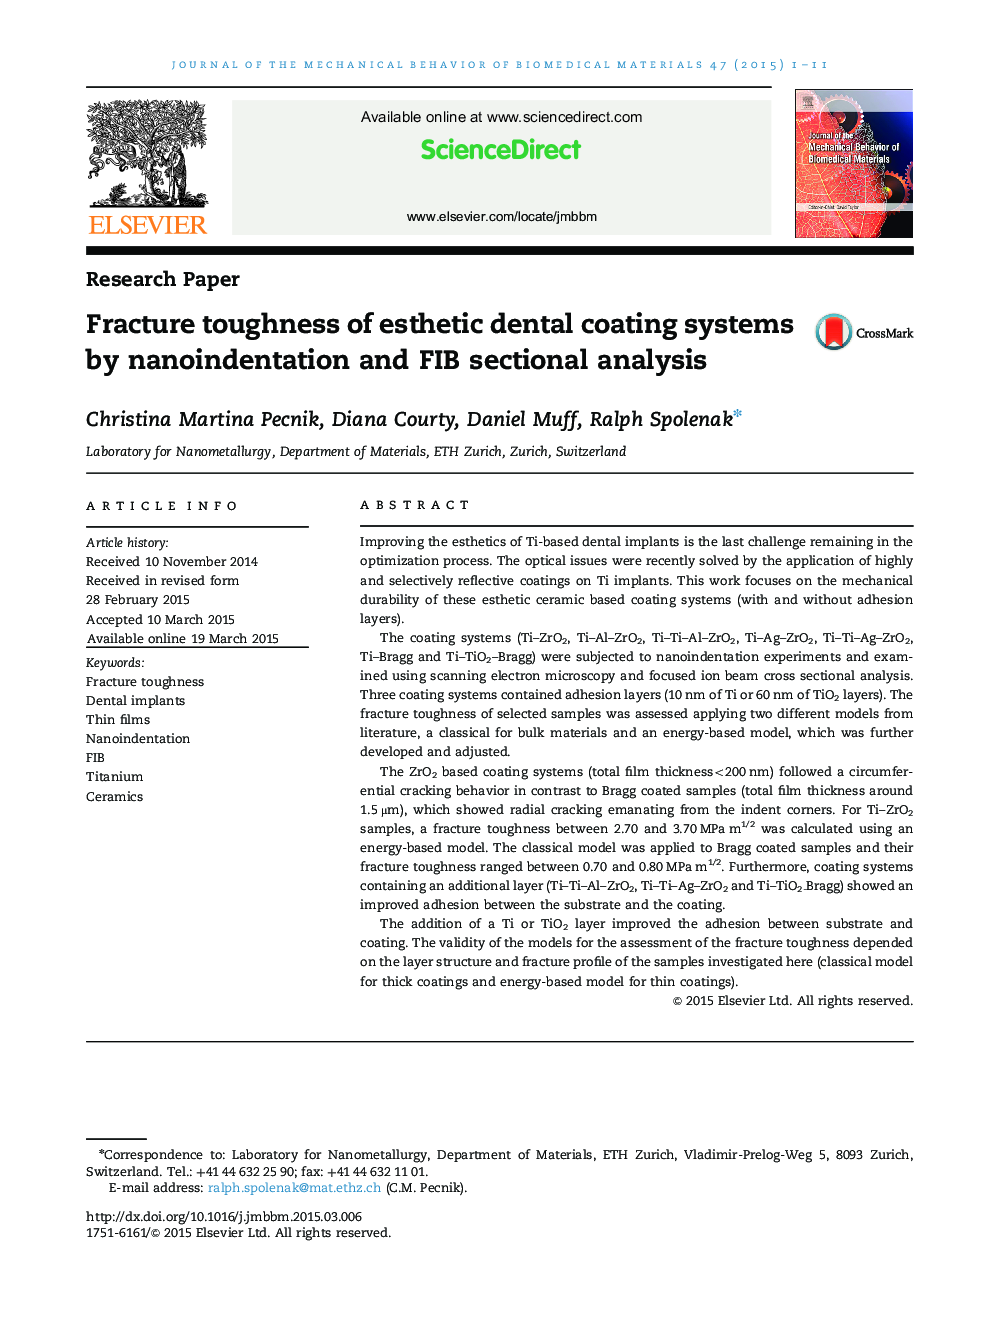 Fracture toughness of esthetic dental coating systems by nanoindentation and FIB sectional analysis